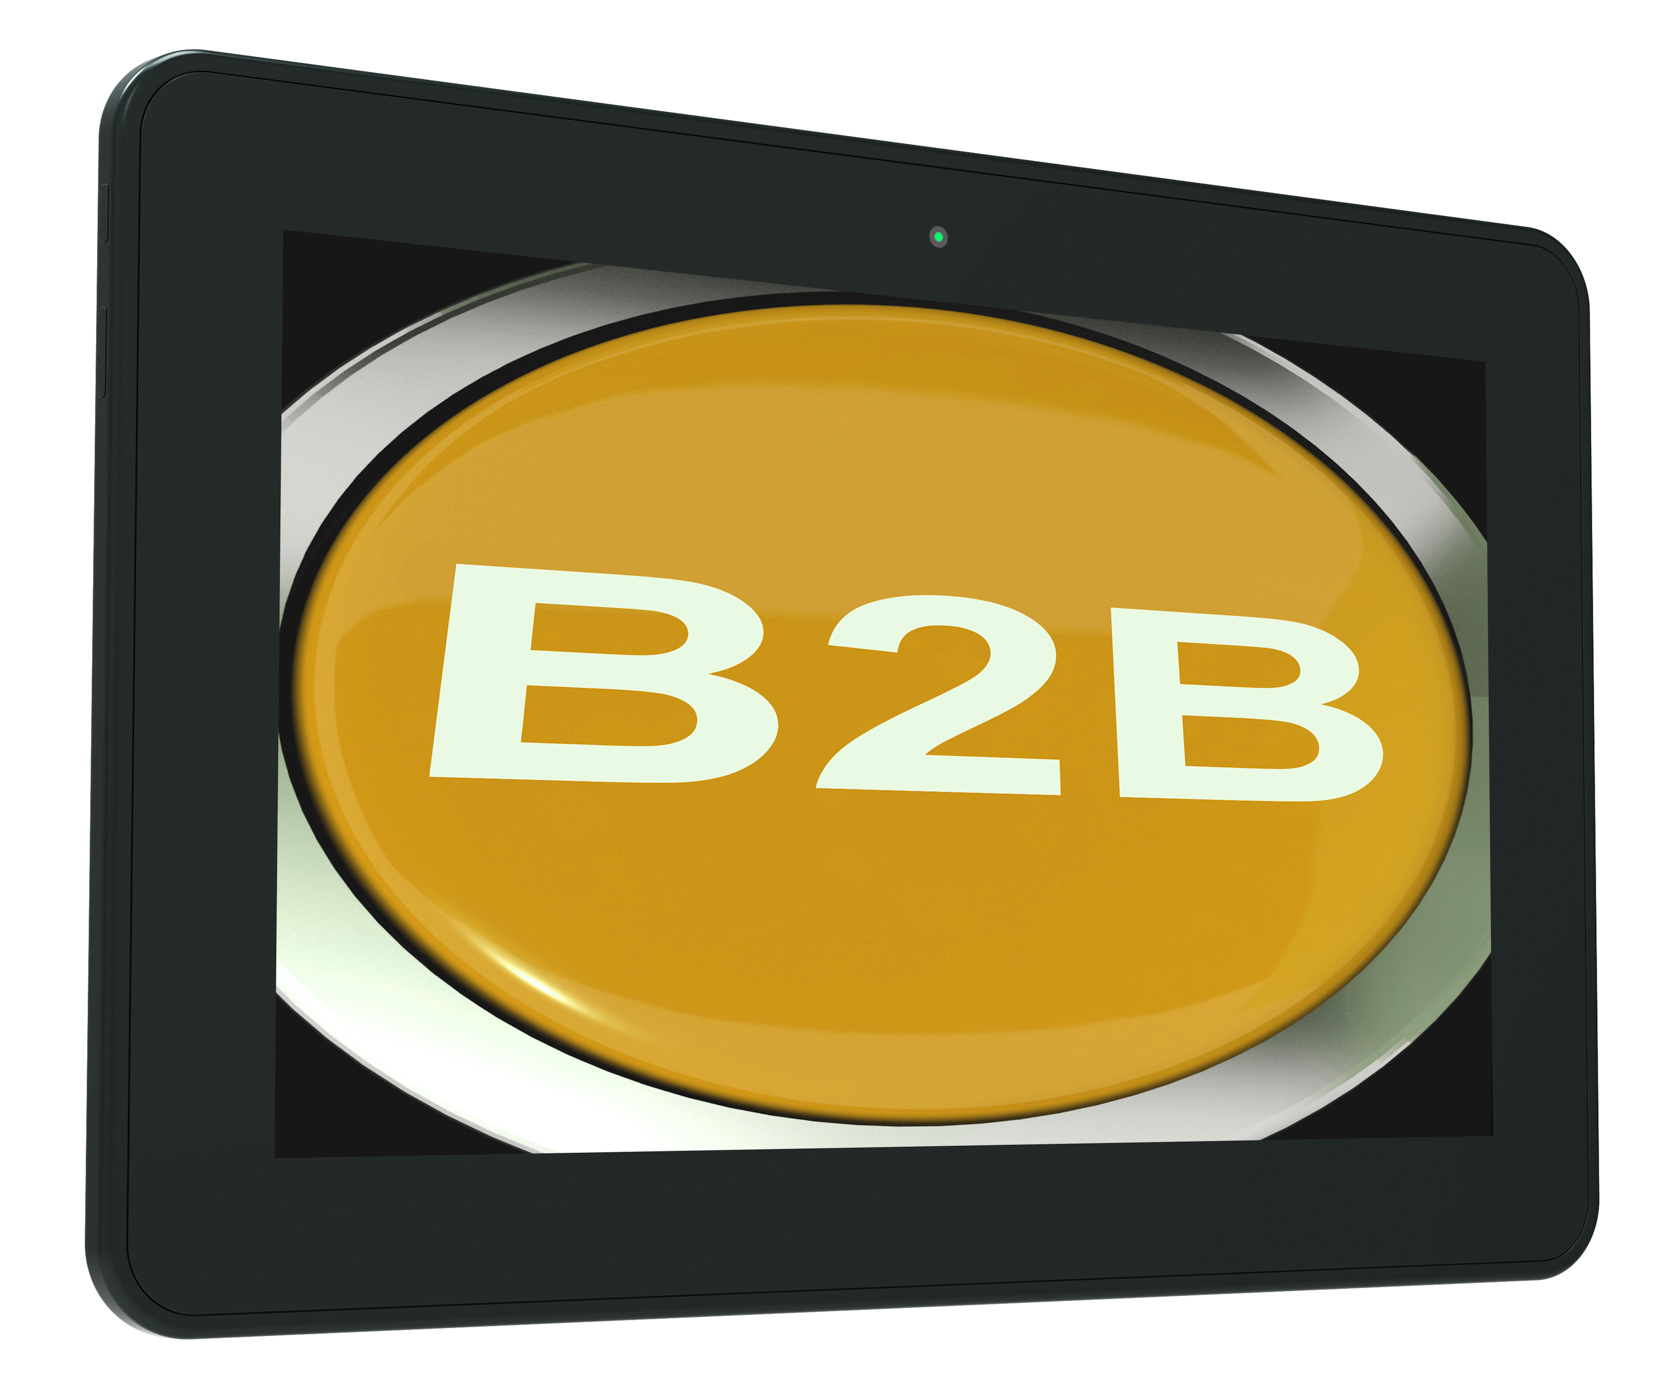 B2b tablet means business trade or deal photo